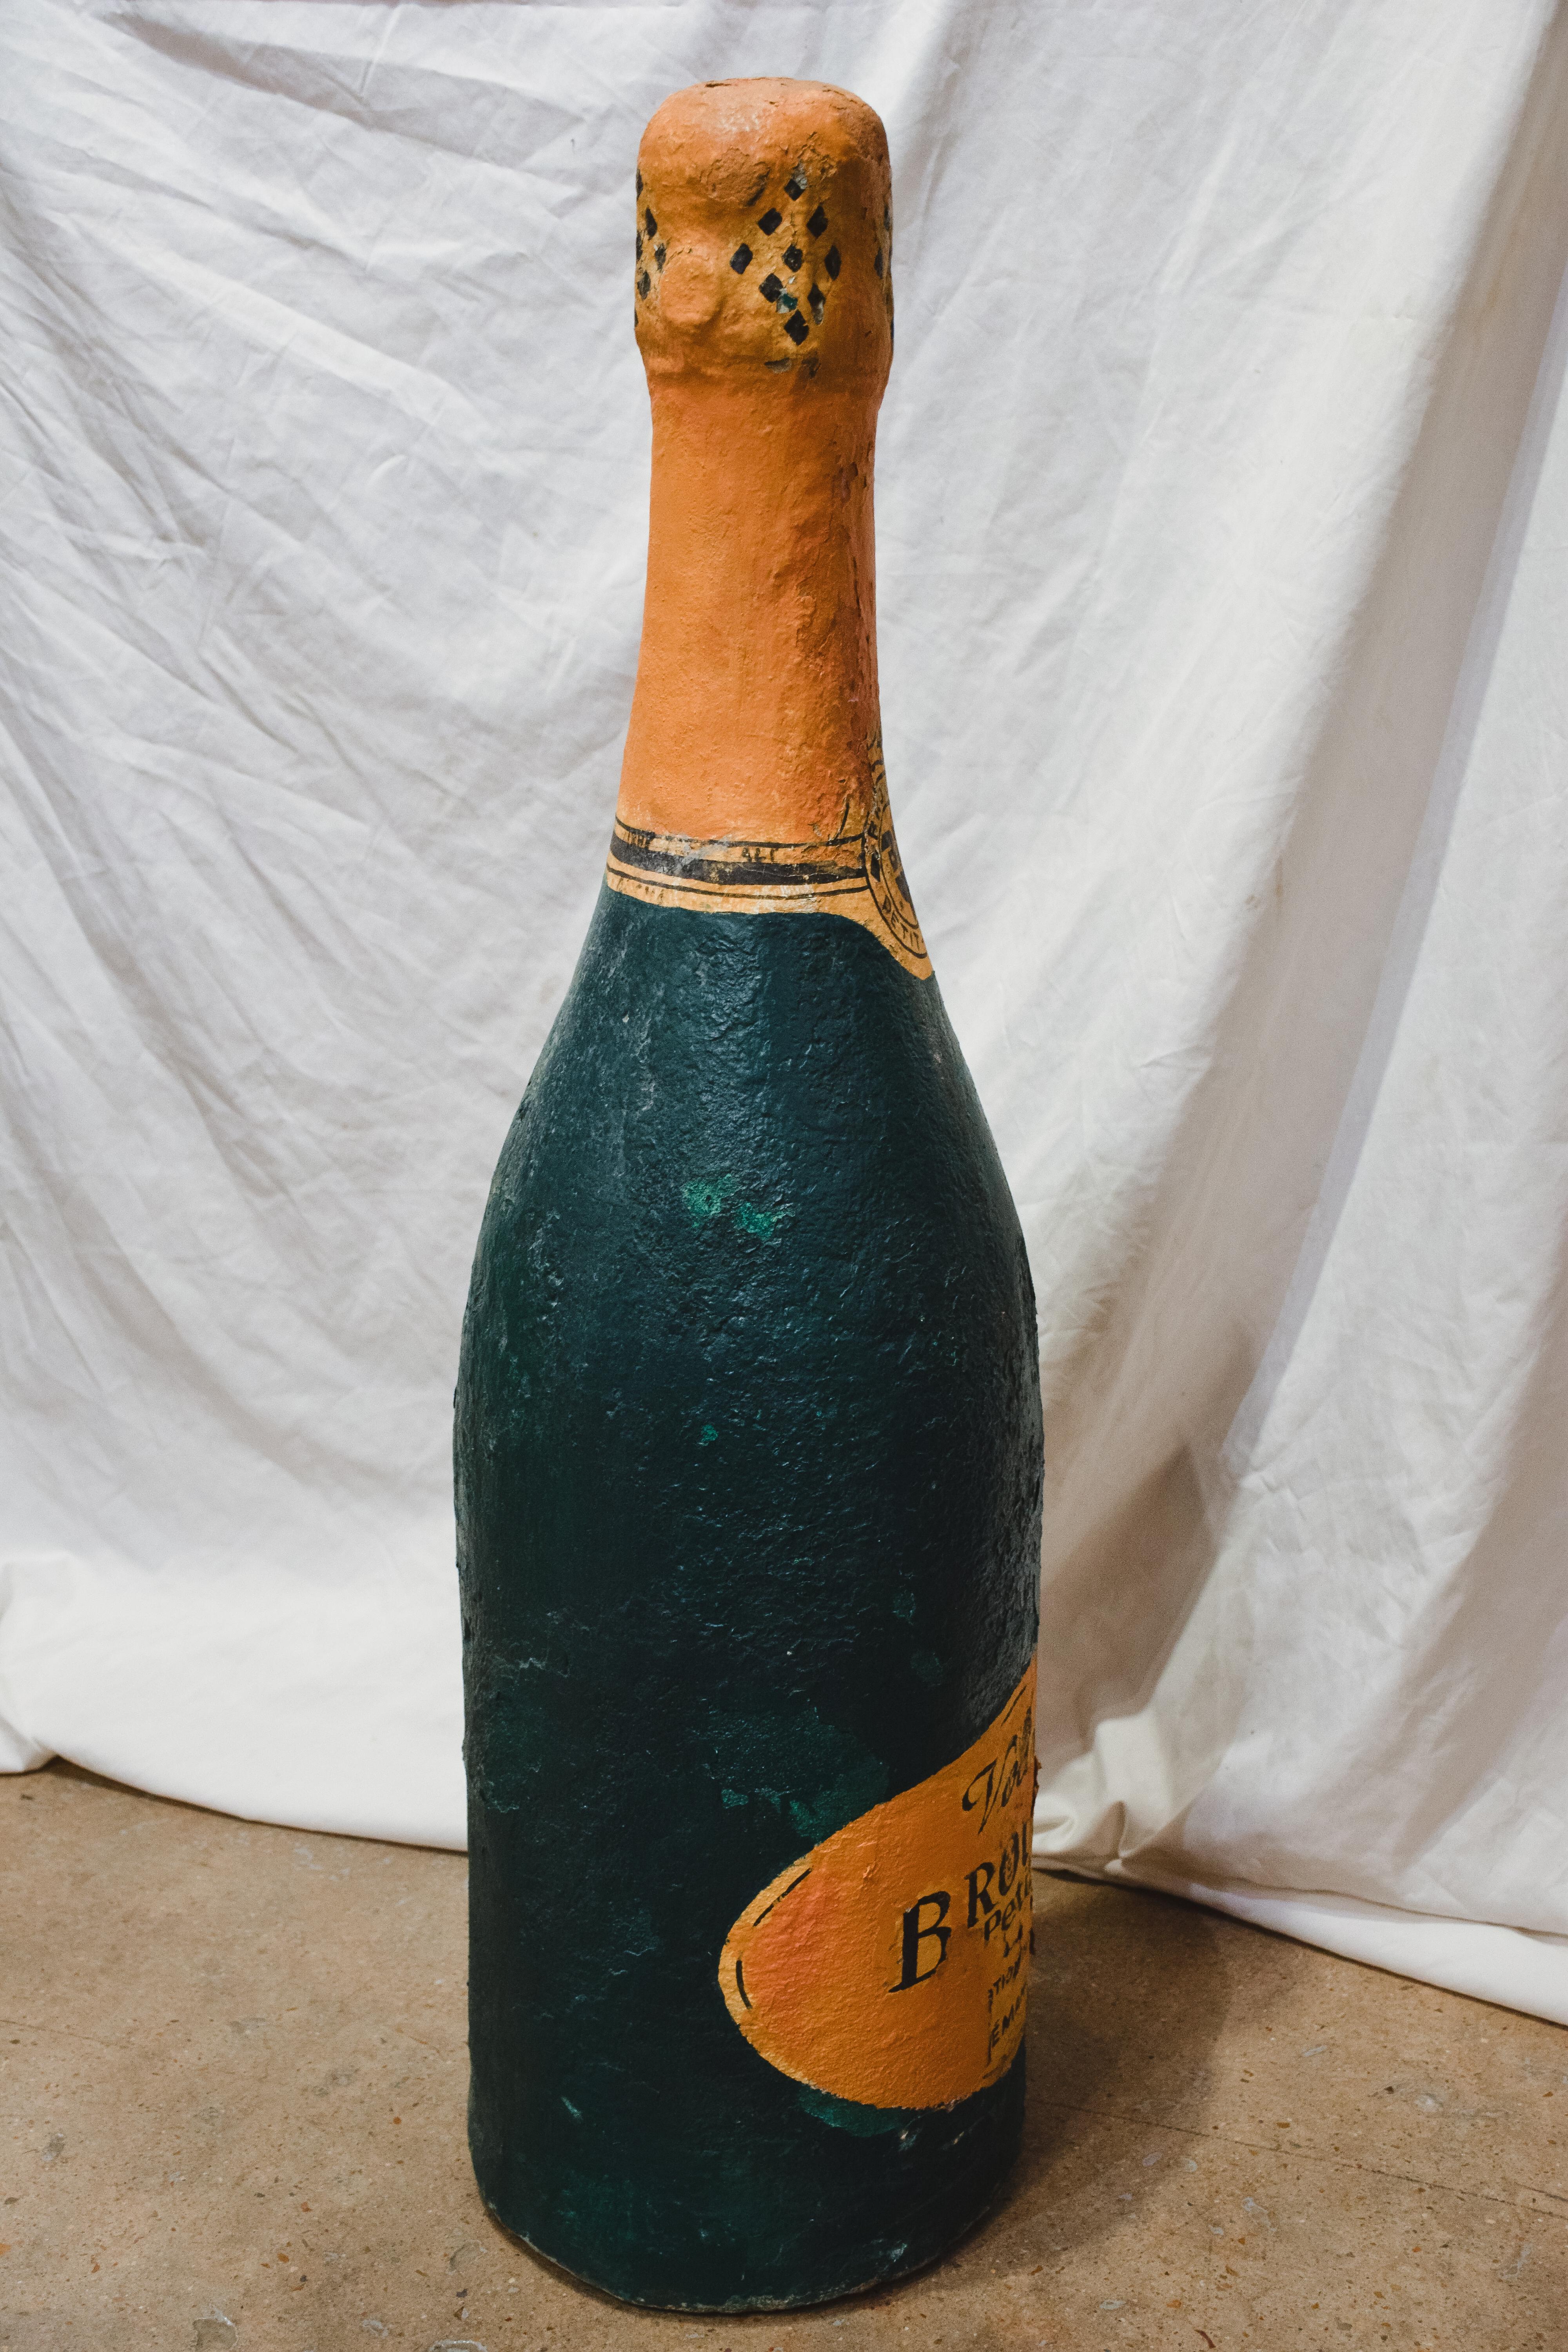 Large, concrete, Brouilly French Sparkling Wine bottle replica. Possibly used as an advertisement or in a prominent spot in the vineyard itself. Would make a great conversation piece as an addition to your wine room.